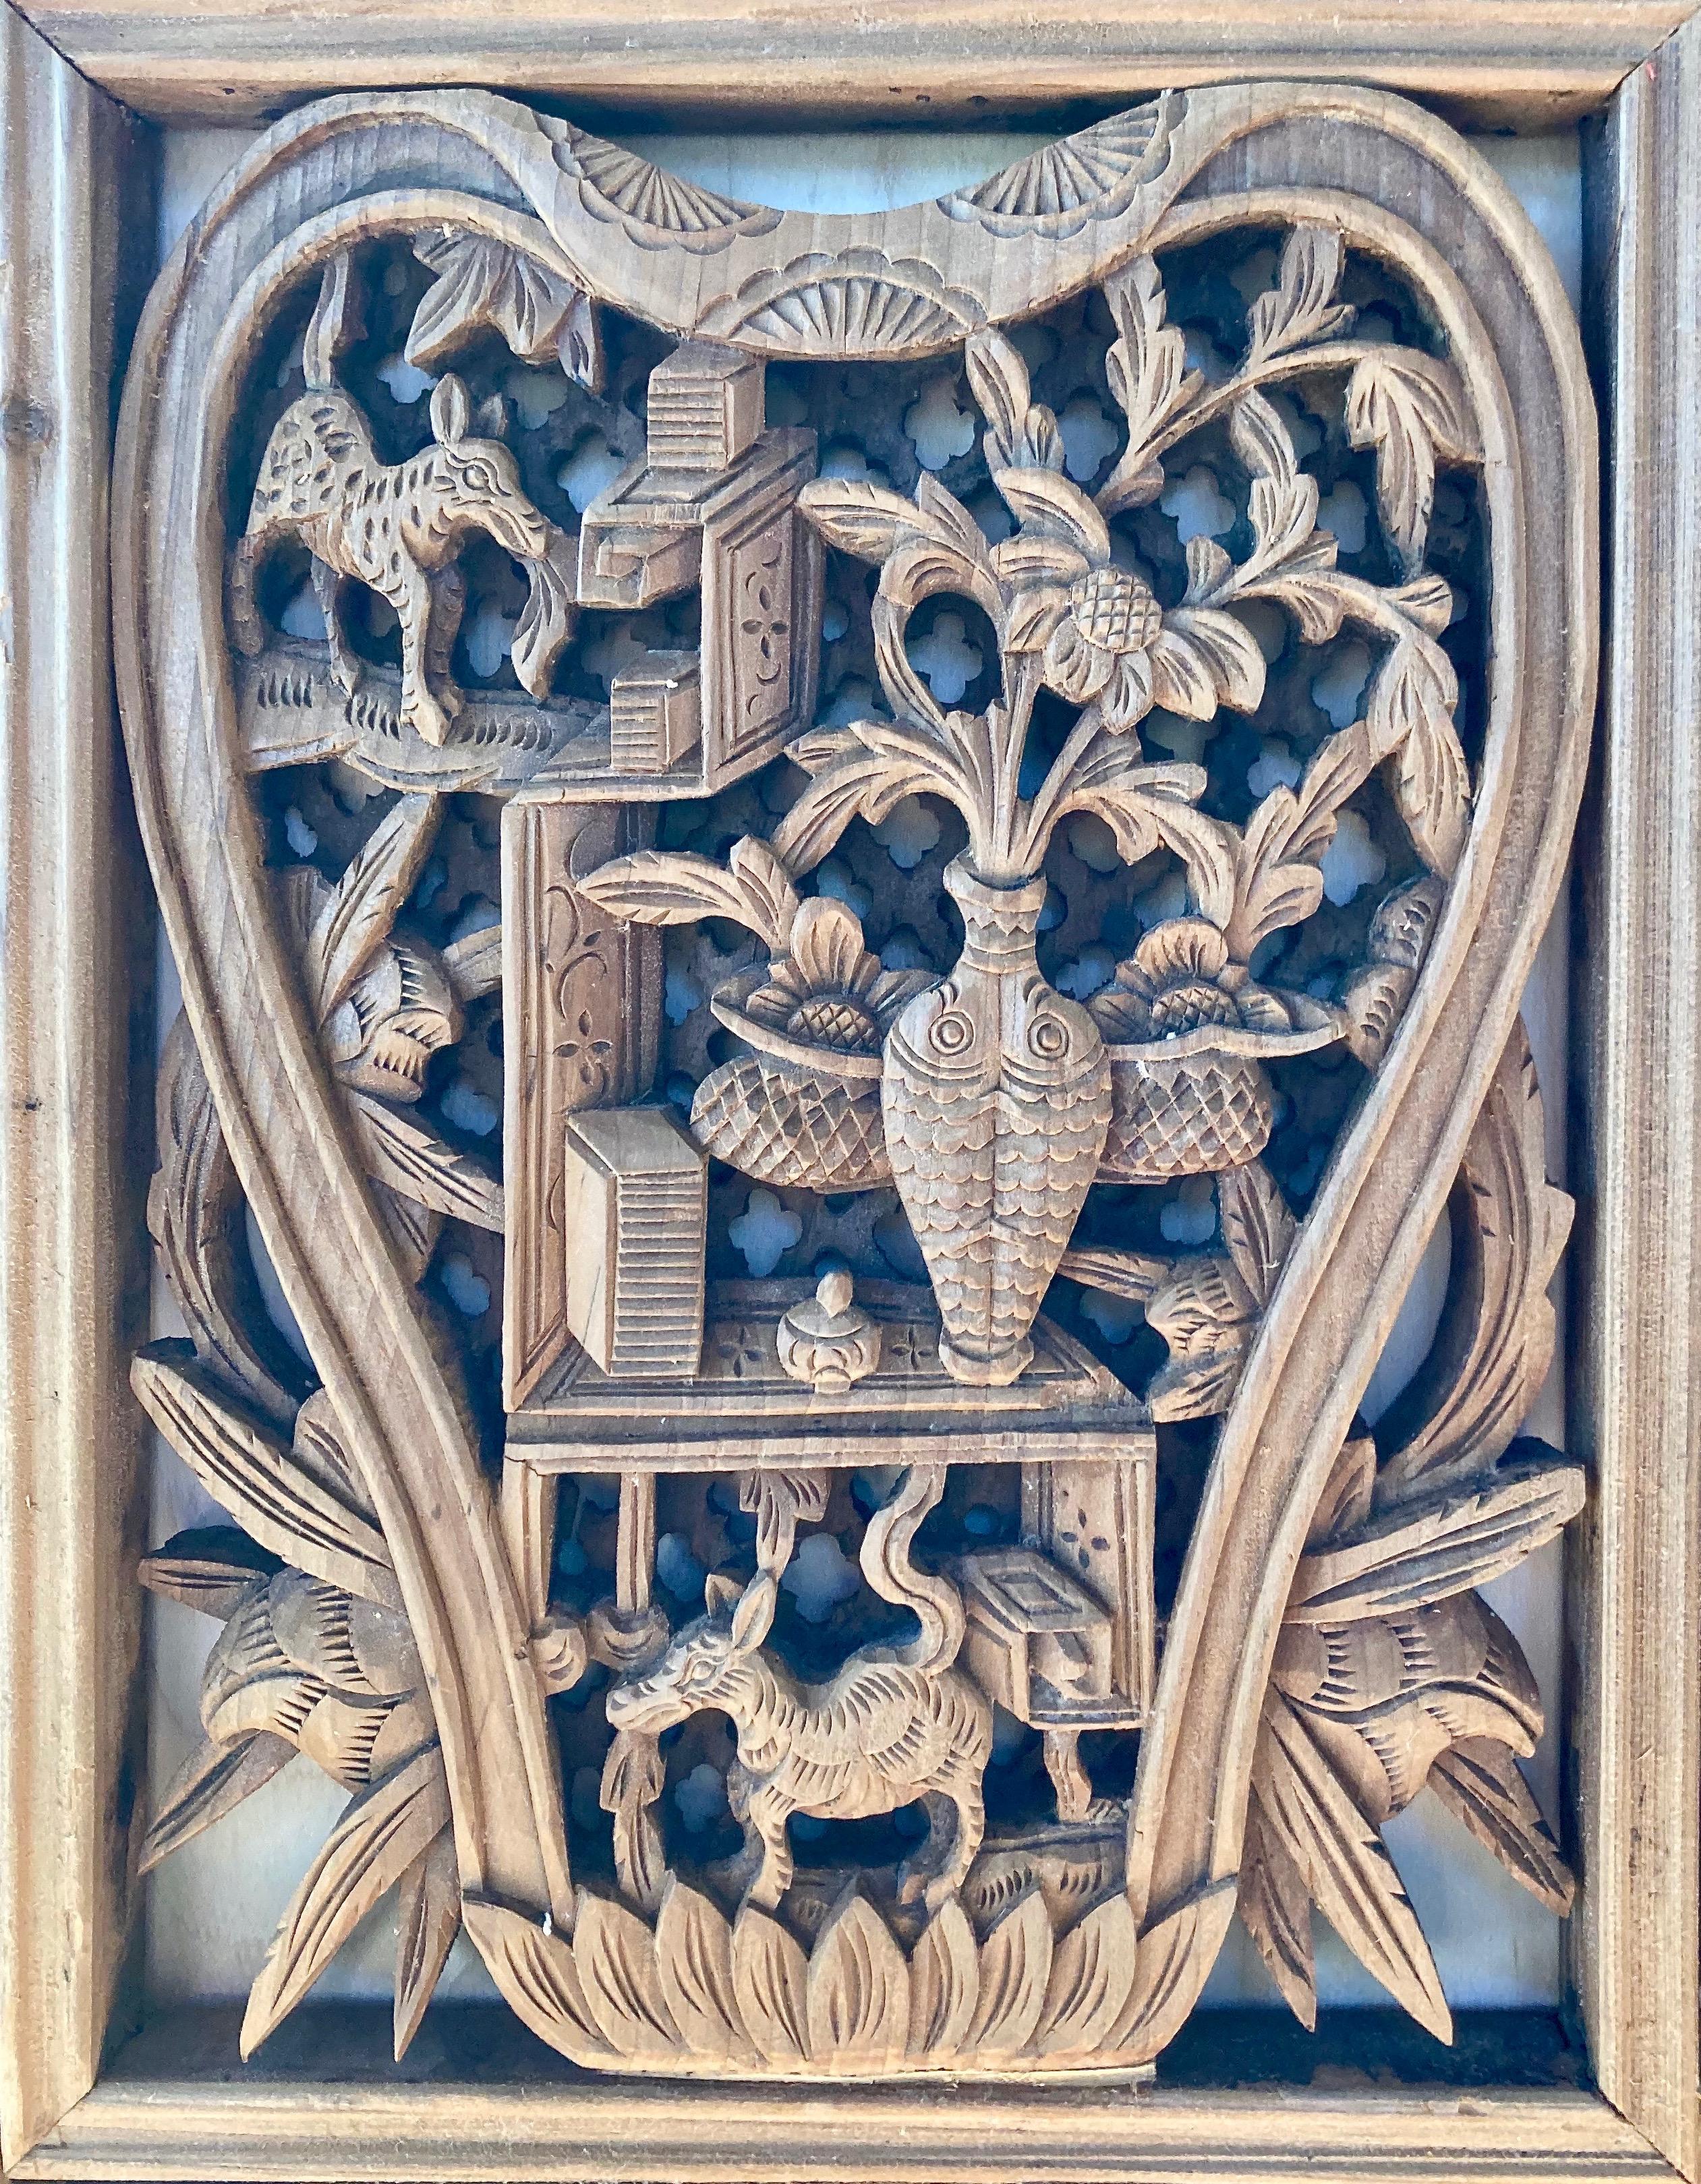 This Chinese decorative lattice work panel, has pear shaped center carving with floral, beast, personage motif. Surrounding small rectangular lattices in symbolic floral and bat motif carvings.